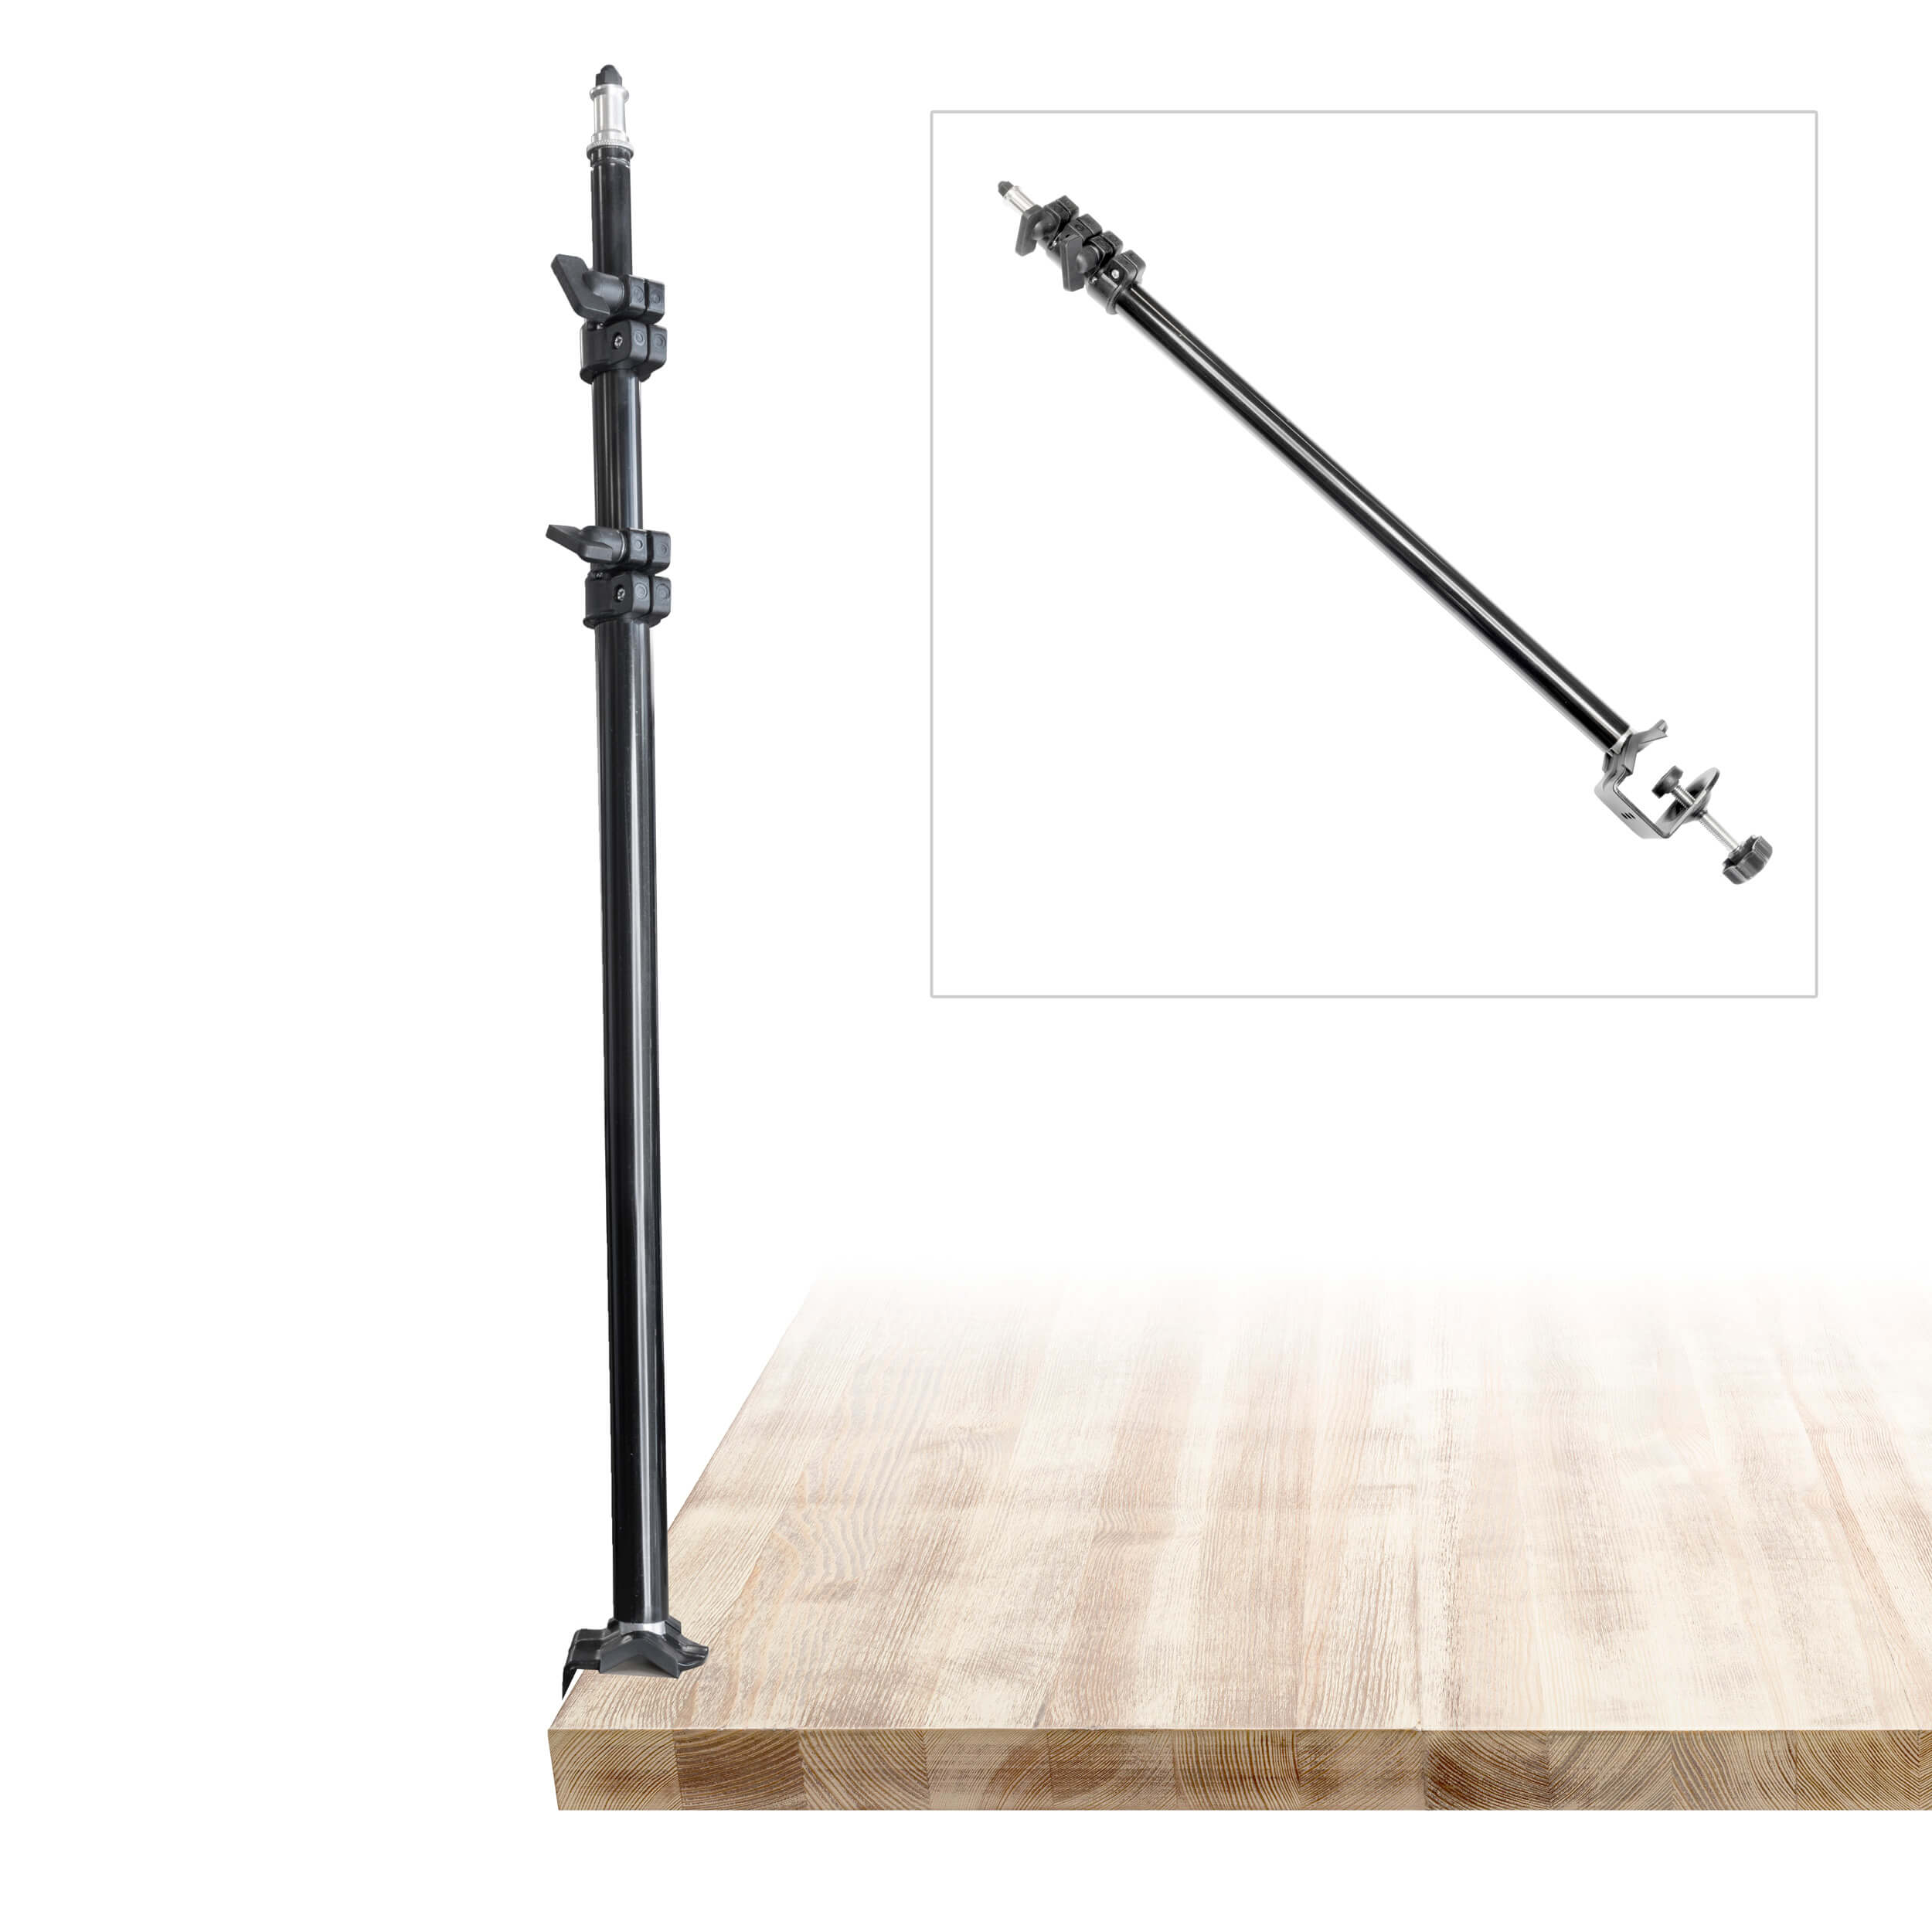 Lightweight Table-Mounted Light Stand with C- Clamp By PixaPro 